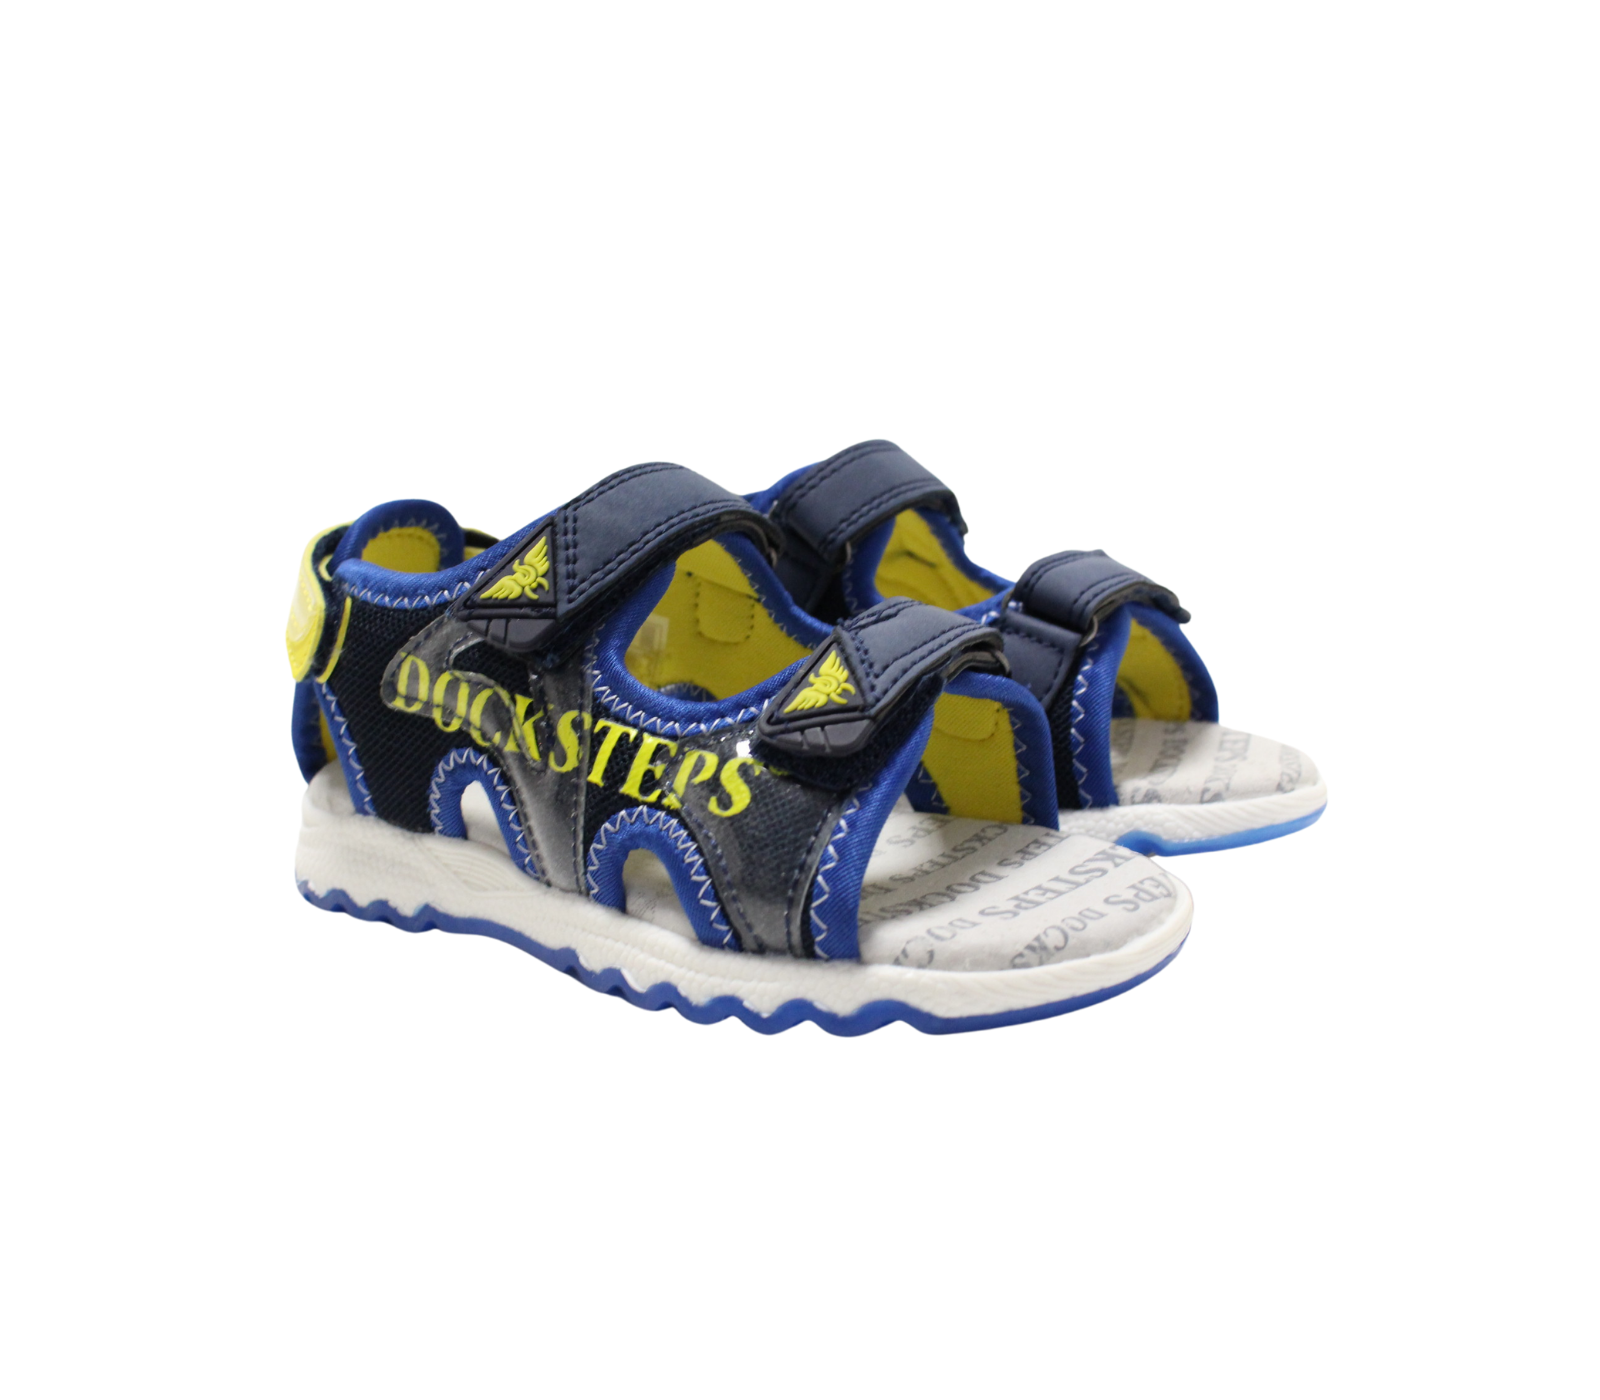 Child's Sandals with Blue Velcro Closure and Logo 